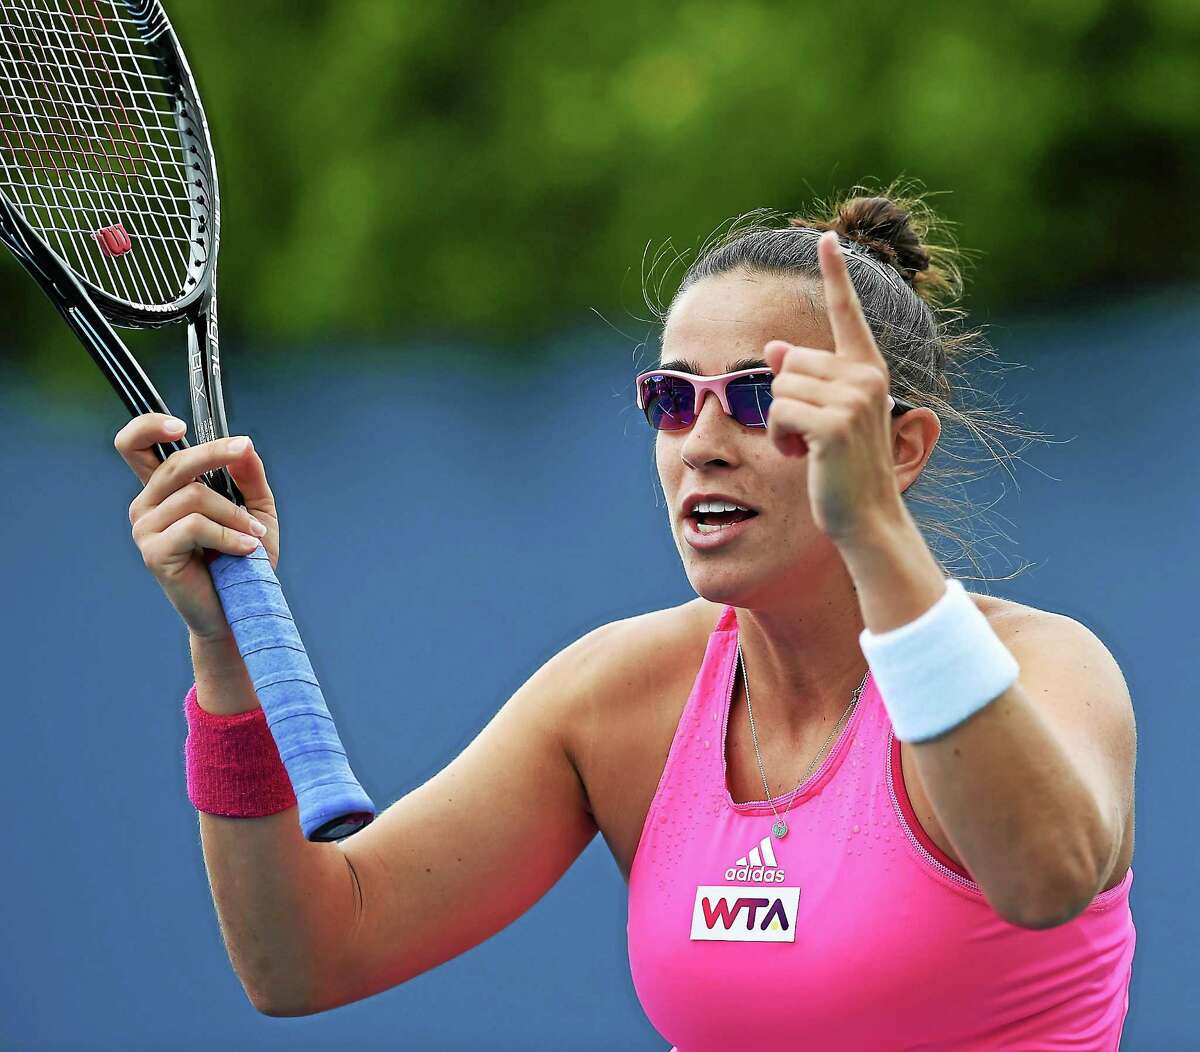 (Mara Lavitt ó New Haven Register) August 15, 2014 New Haven Today was the first day of the CT Open at the Connecticut Tennis Center. Paula Ormaechea. mlavitt@newhavenregister.com